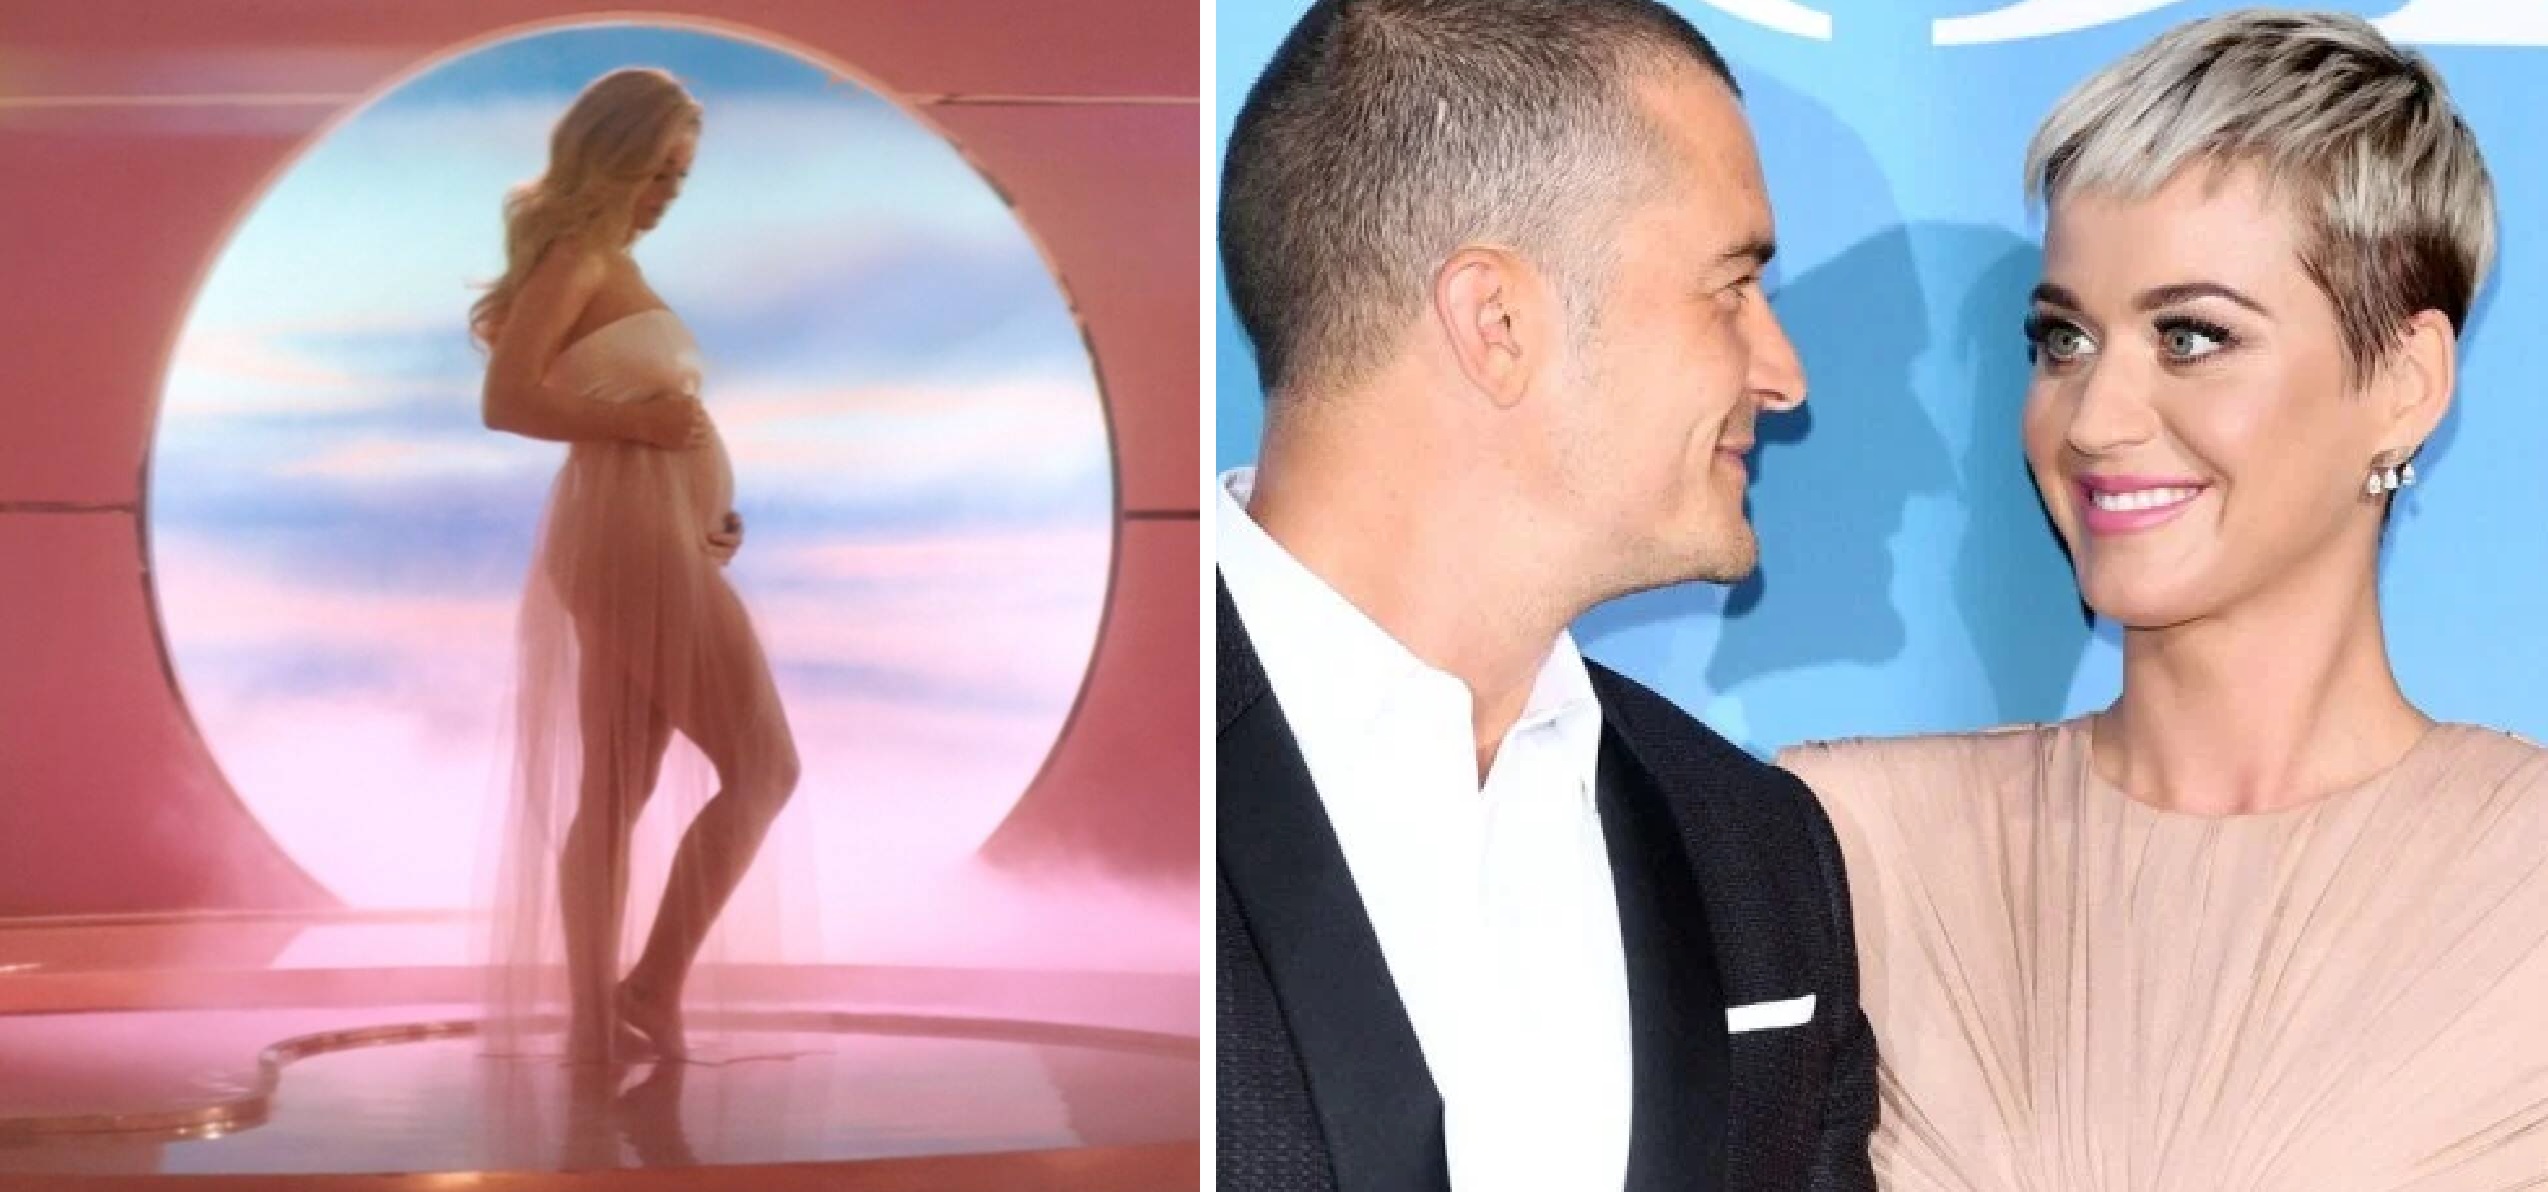 Katy Perry Is Pregnant! The ‘Roar’ Singer Announces Pregnancy in New Music Video!